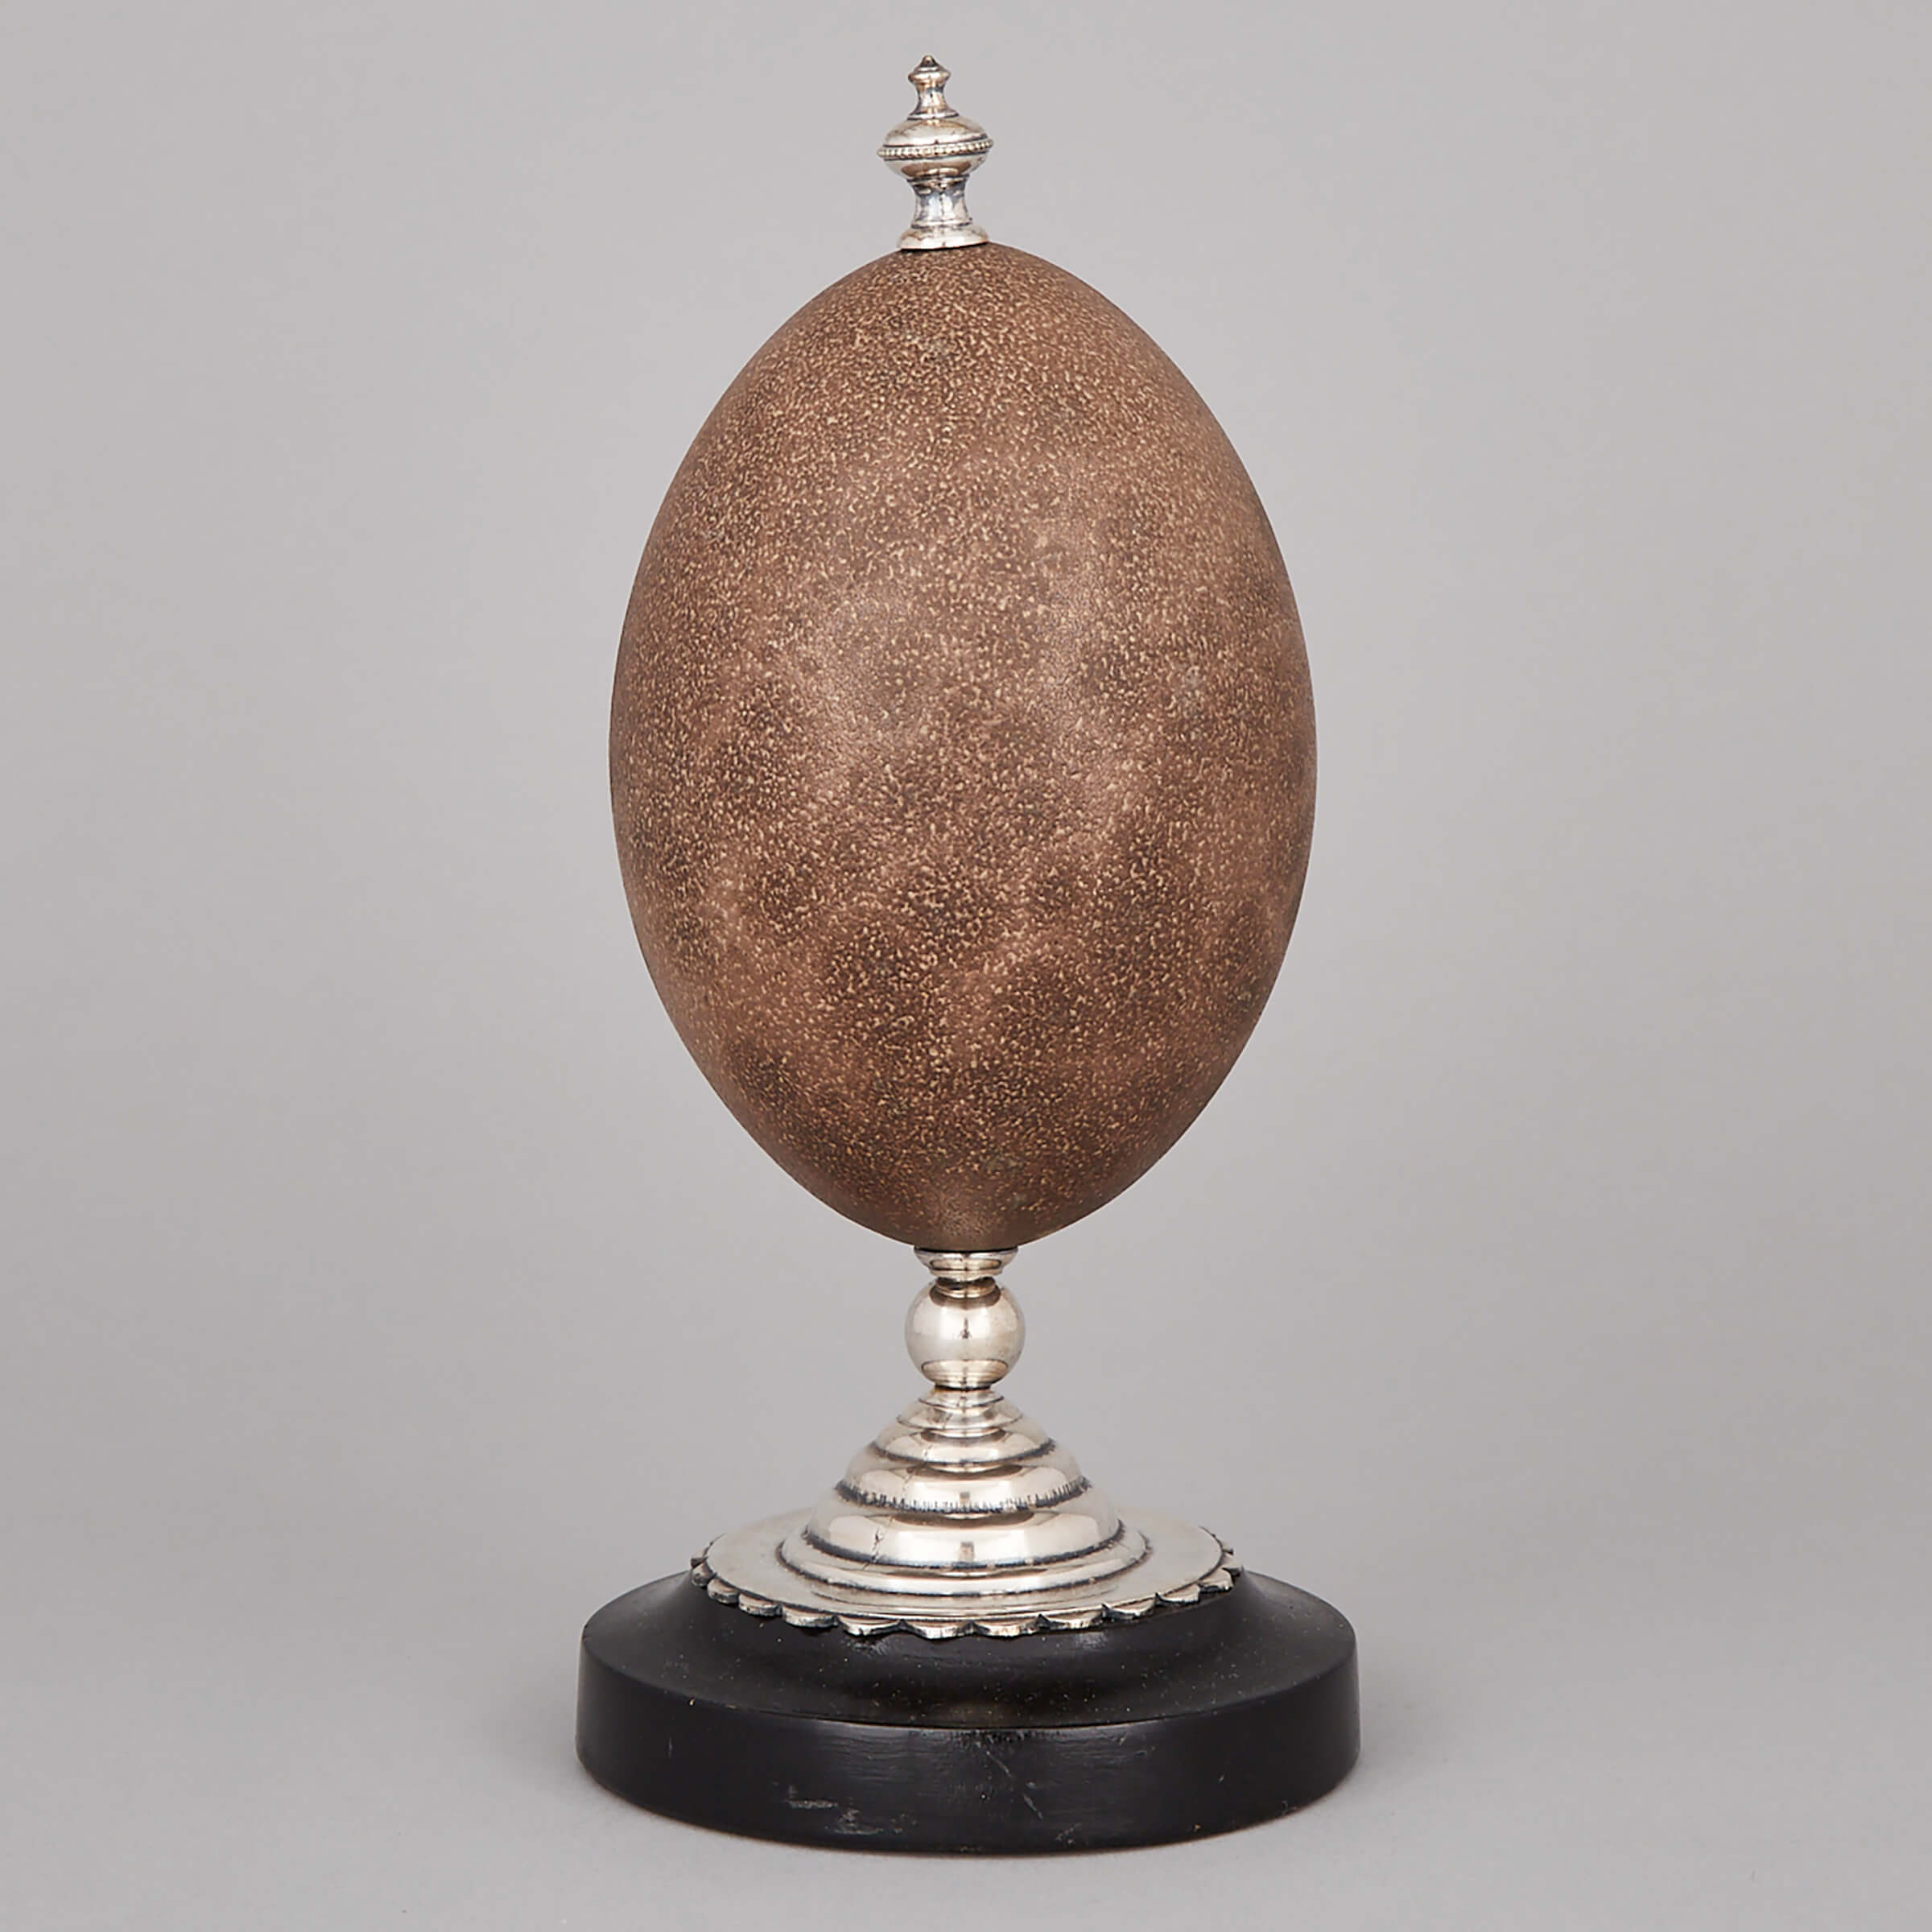 Australian Victorian Silver Plate Mounted Emu Egg on Stand, 19th century